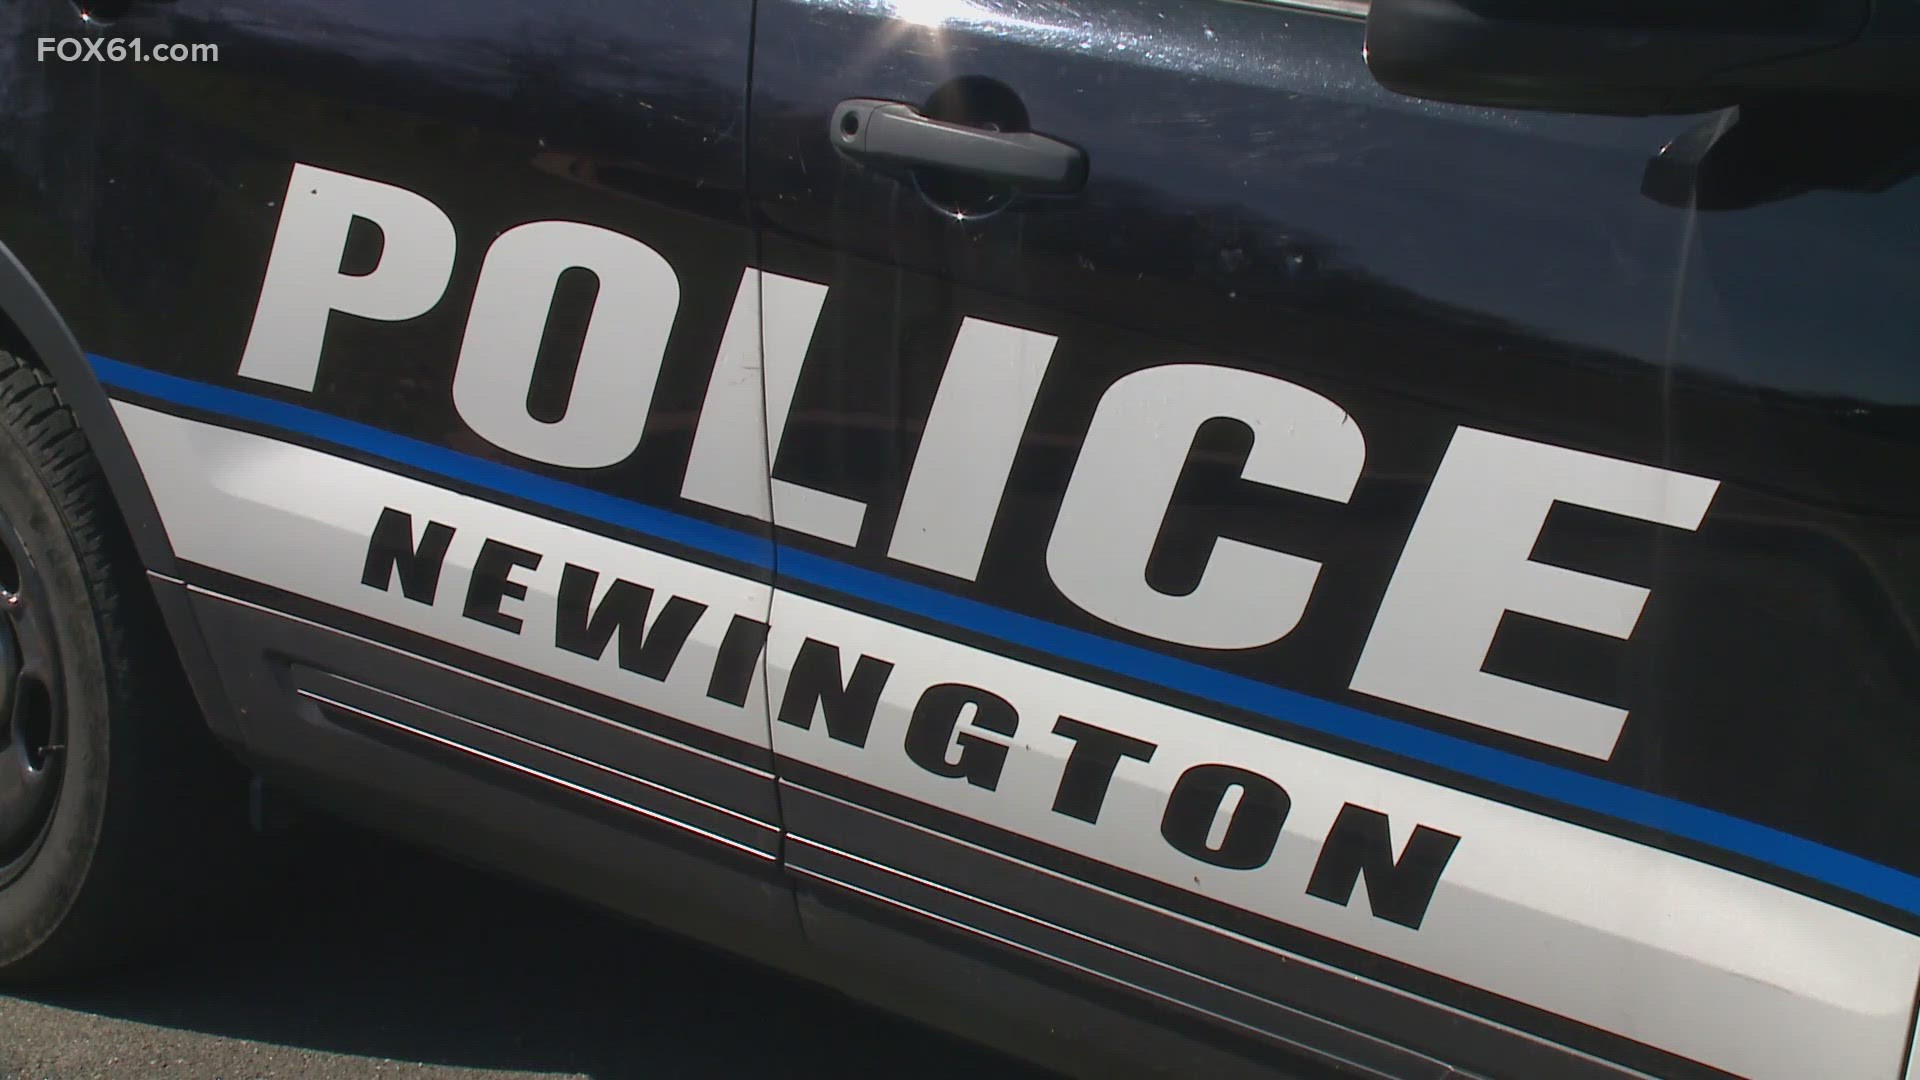 The Newington Police Department issued a warning to residents after receiving numerous calls from residents.